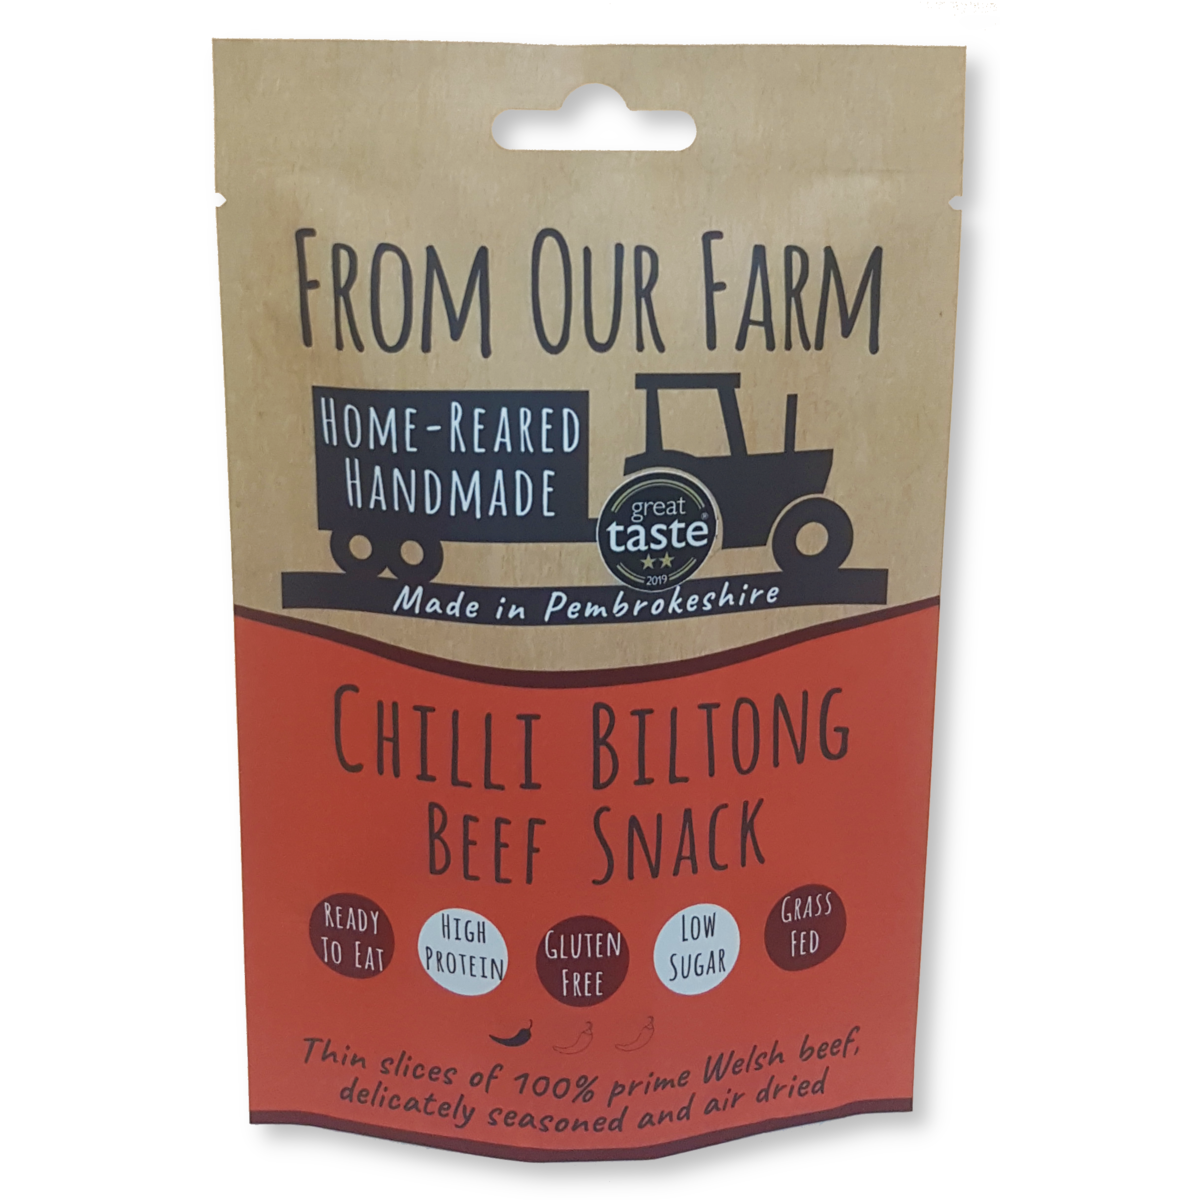 From our farm chilli biltong